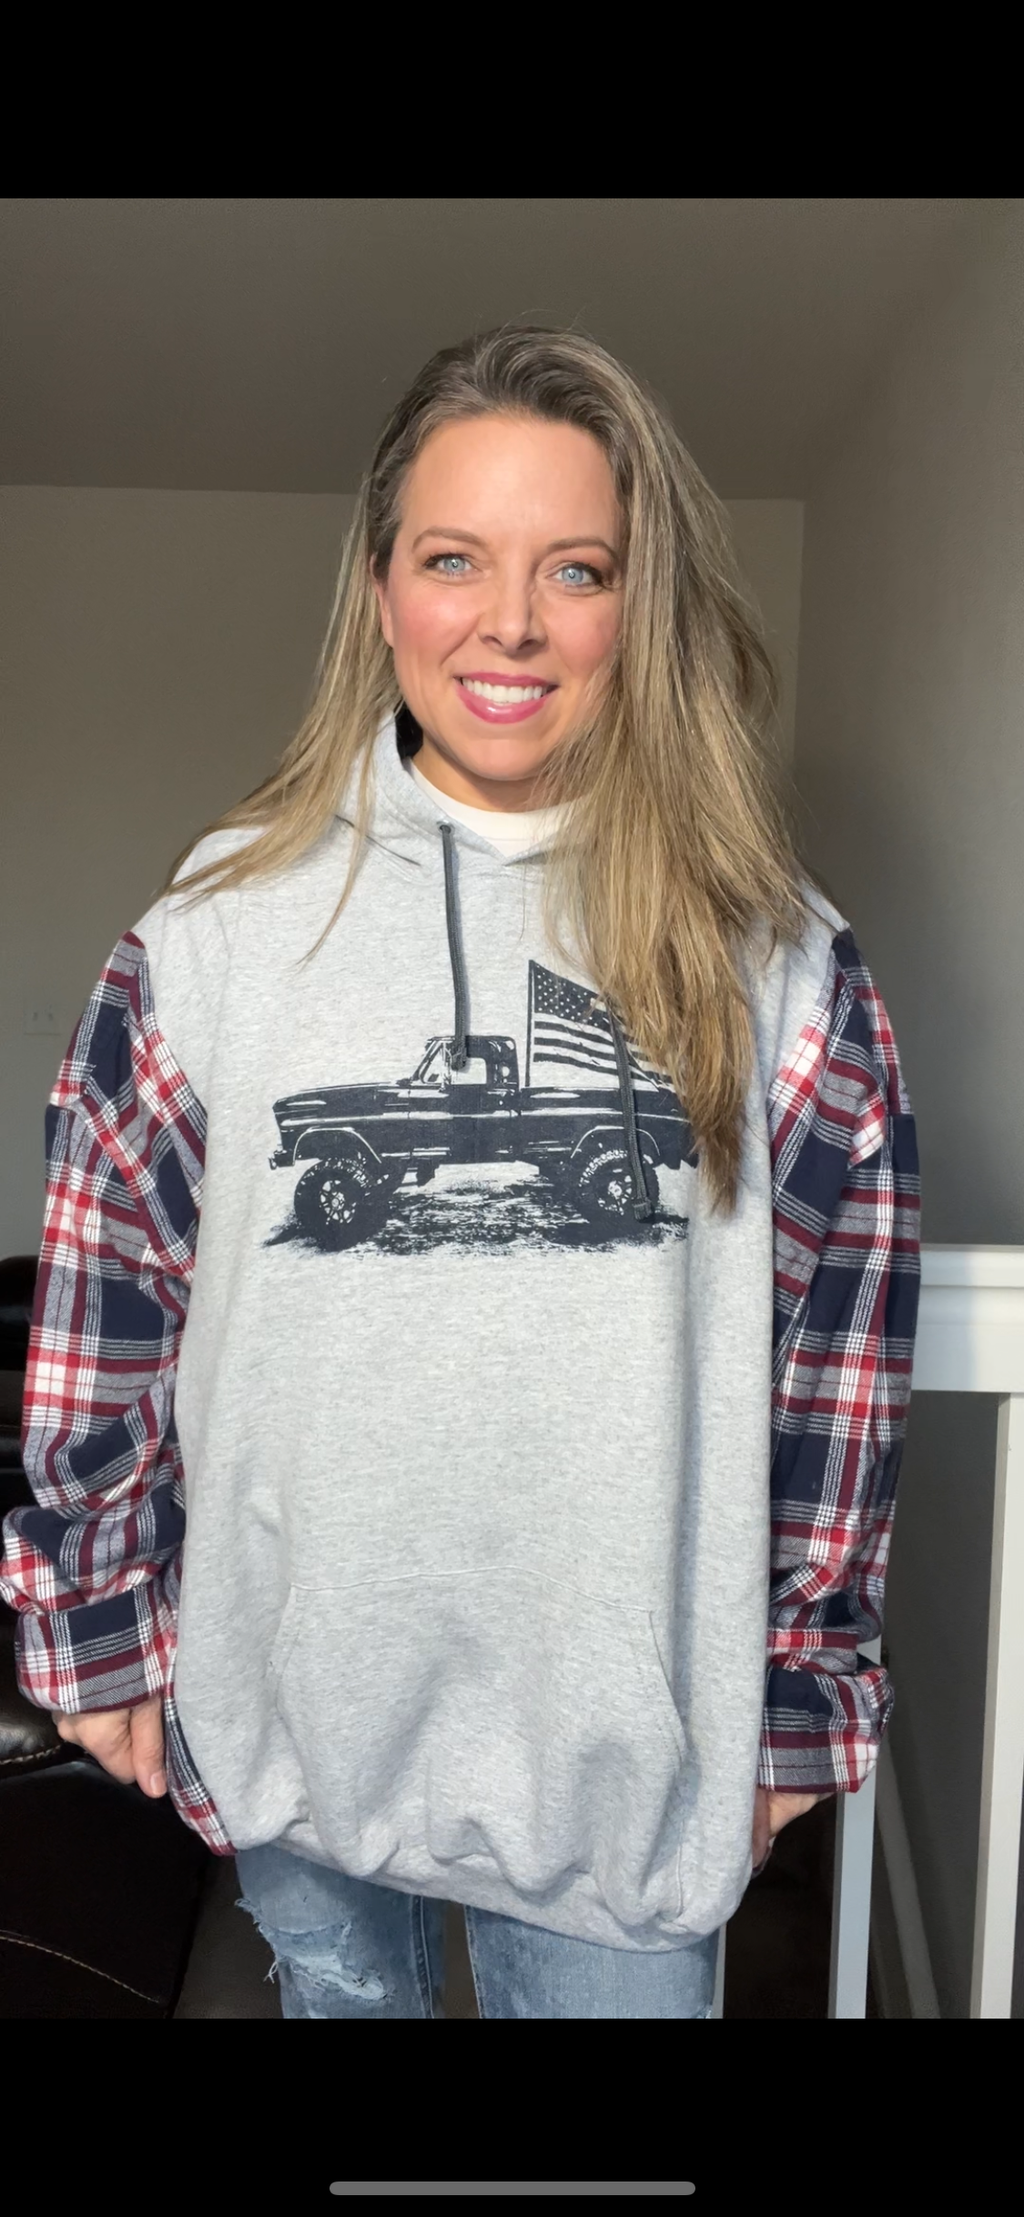 Upcycled Truck – women’s 4X - soft thick sweatshirt with flannel sleeves￼